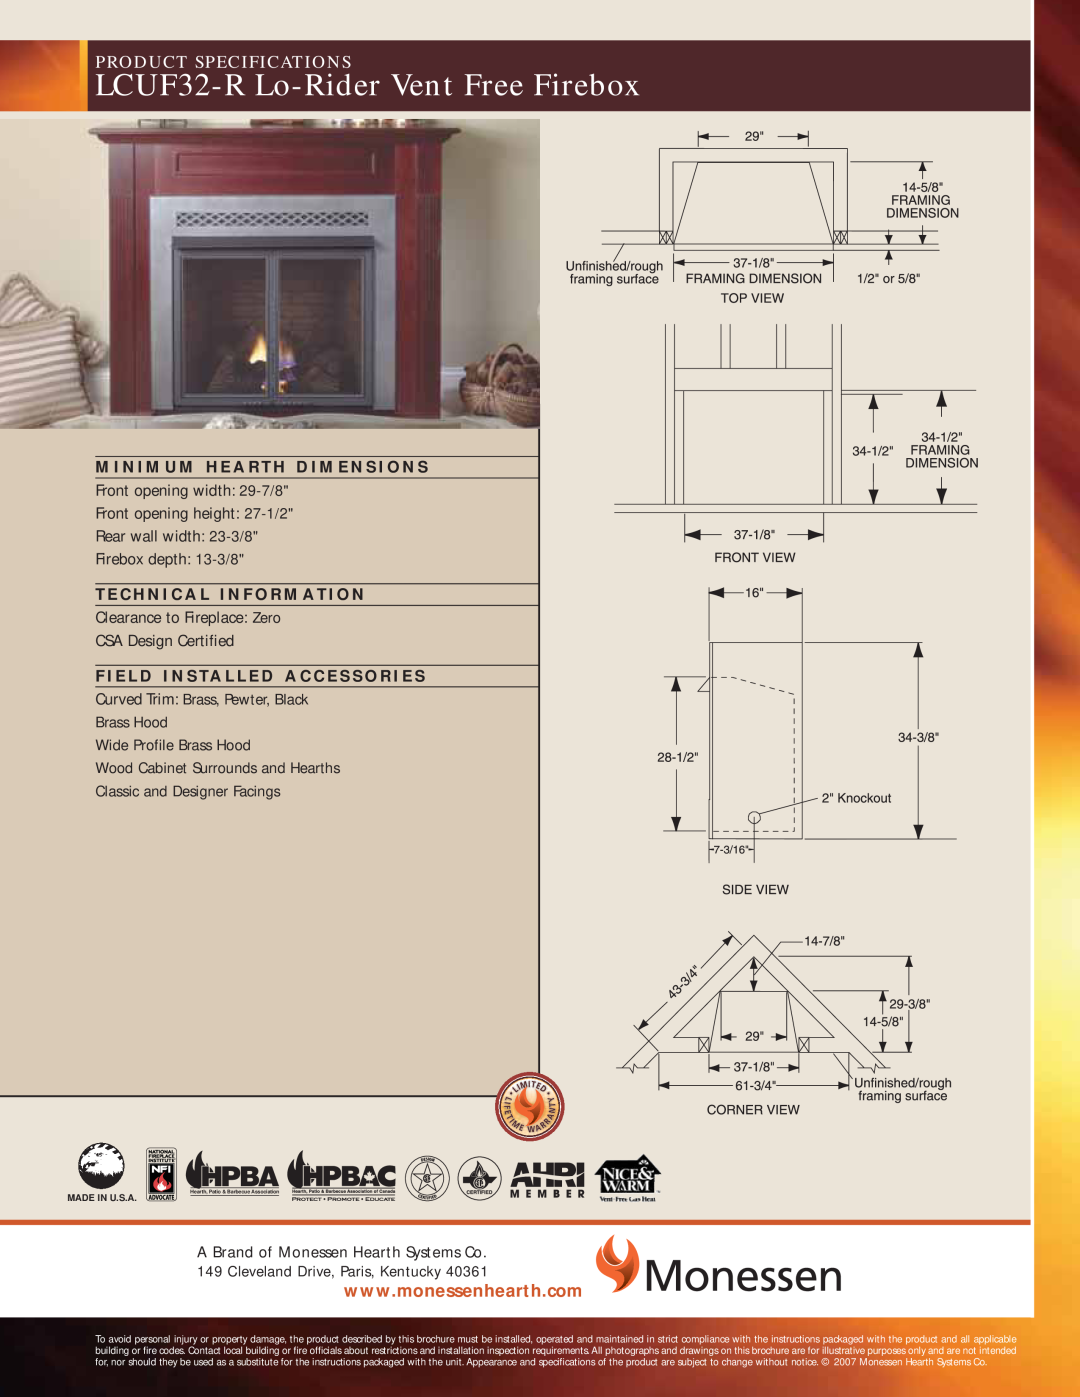 Monessen Hearth specifications LCUF32-R Lo-RiderVent Free Firebox, Product Specifications 